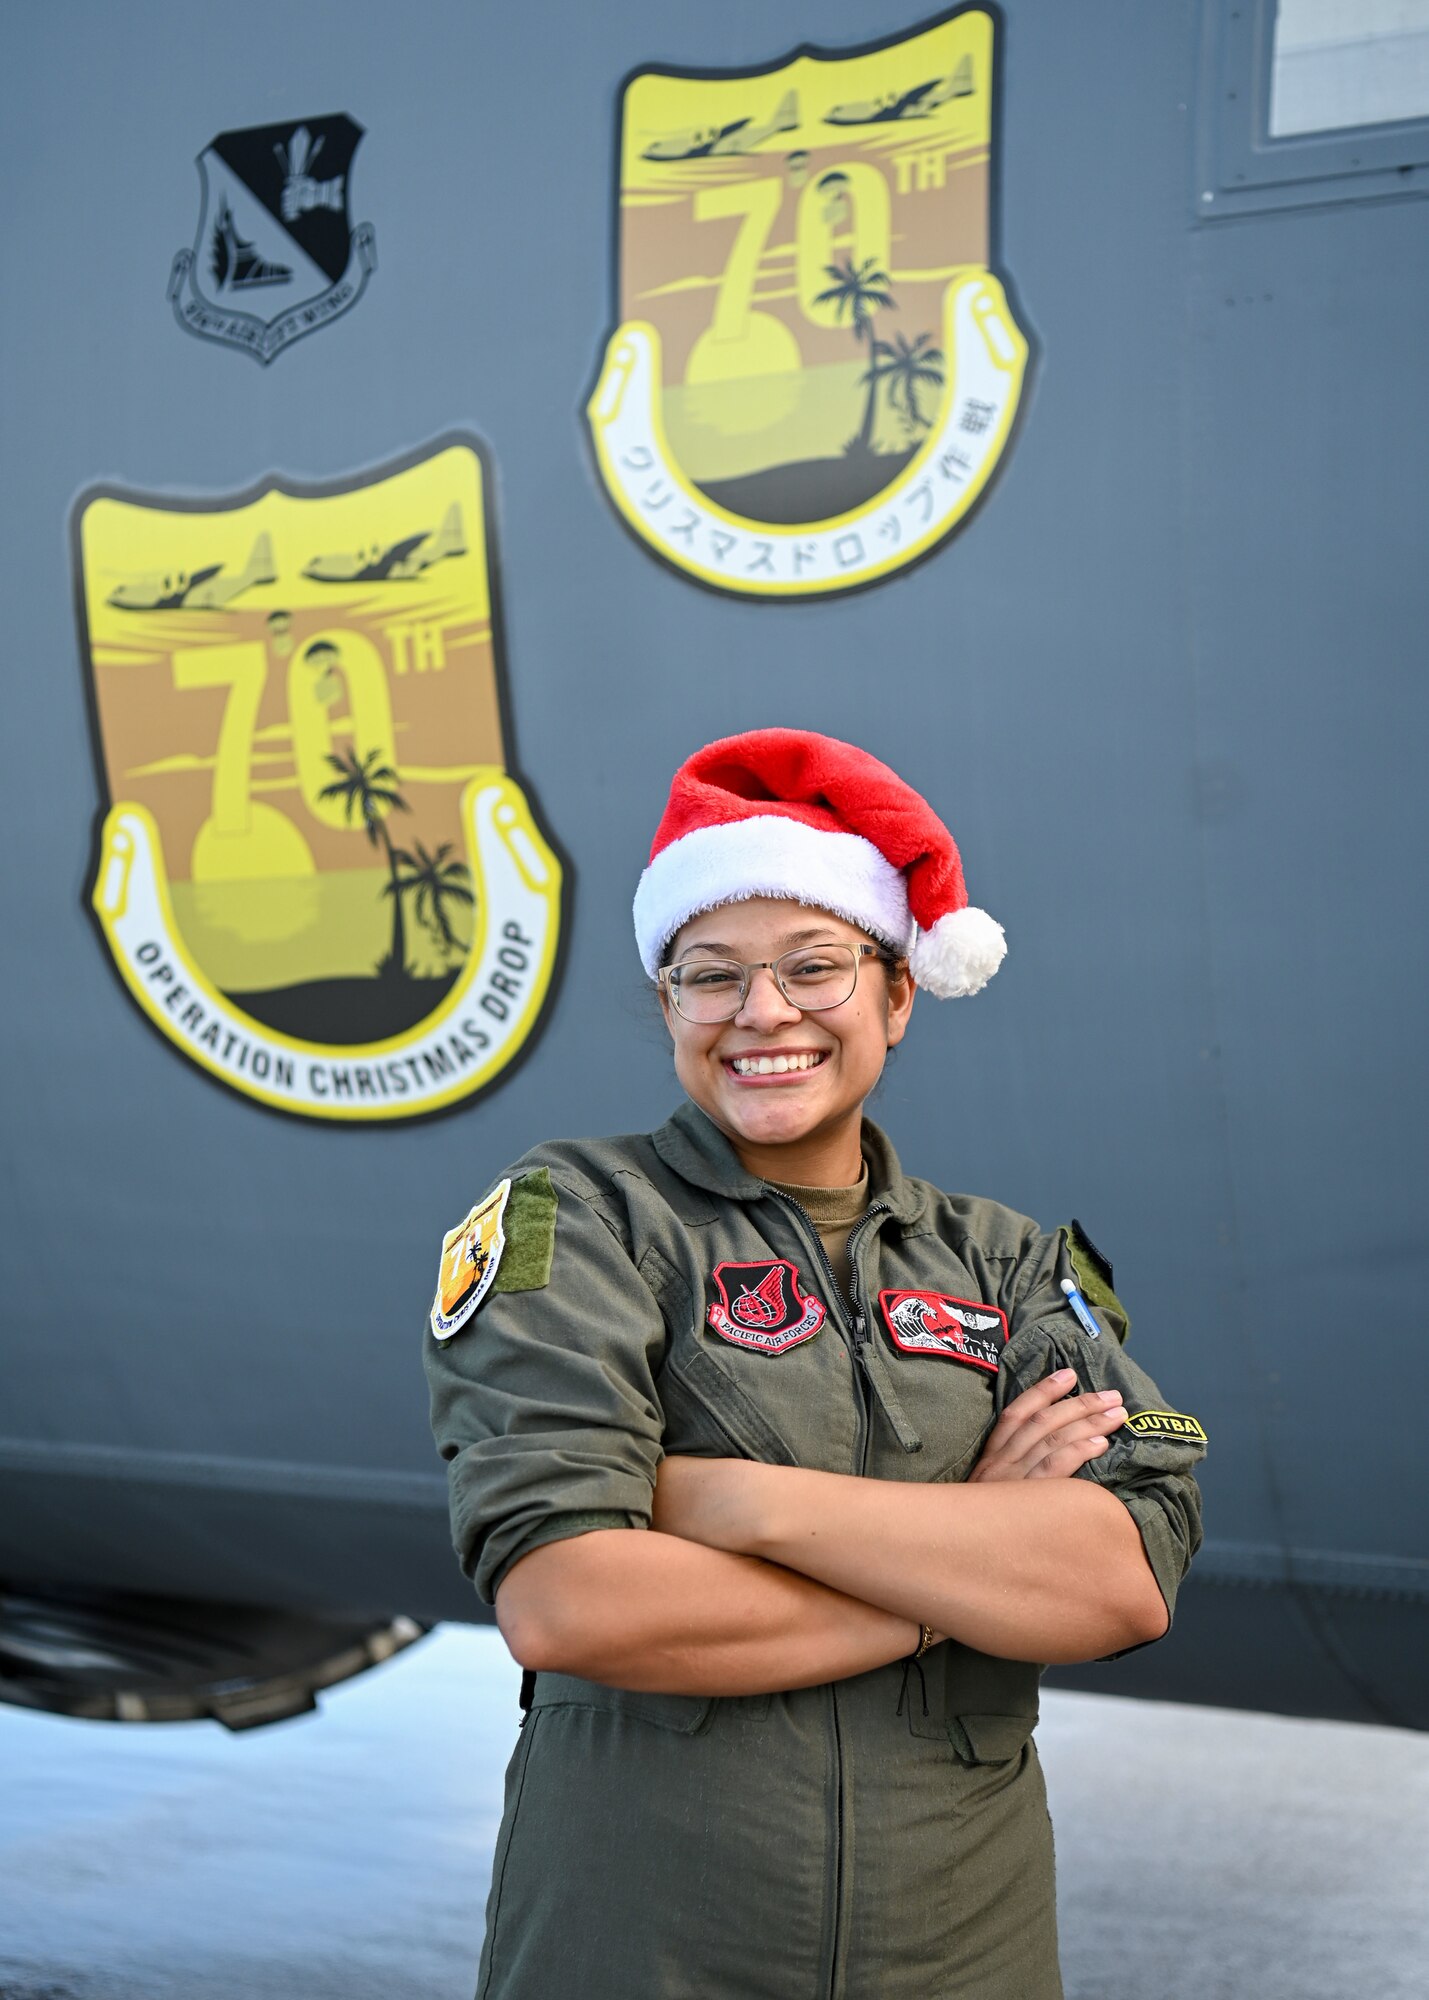 U.S. Air Force Senior Airman Kim Doyle, a loadmaster assigned to the 36th Airlift Squadron, Yokota Air Base, Japan, poses for a portrait in front of a U.S. Air Force C-130J during Operation Christmas Drop at Andersen Air Force Base, Guam, Dec. 10, 2021. OCD is the Department of Defense’s longest-running humanitarian airlift operation, beginning in 1952. Today, airdrop operations include more than 55 islands throughout the Pacific. (U.S. Air Force photo by Senior Airman Aubree Owens)